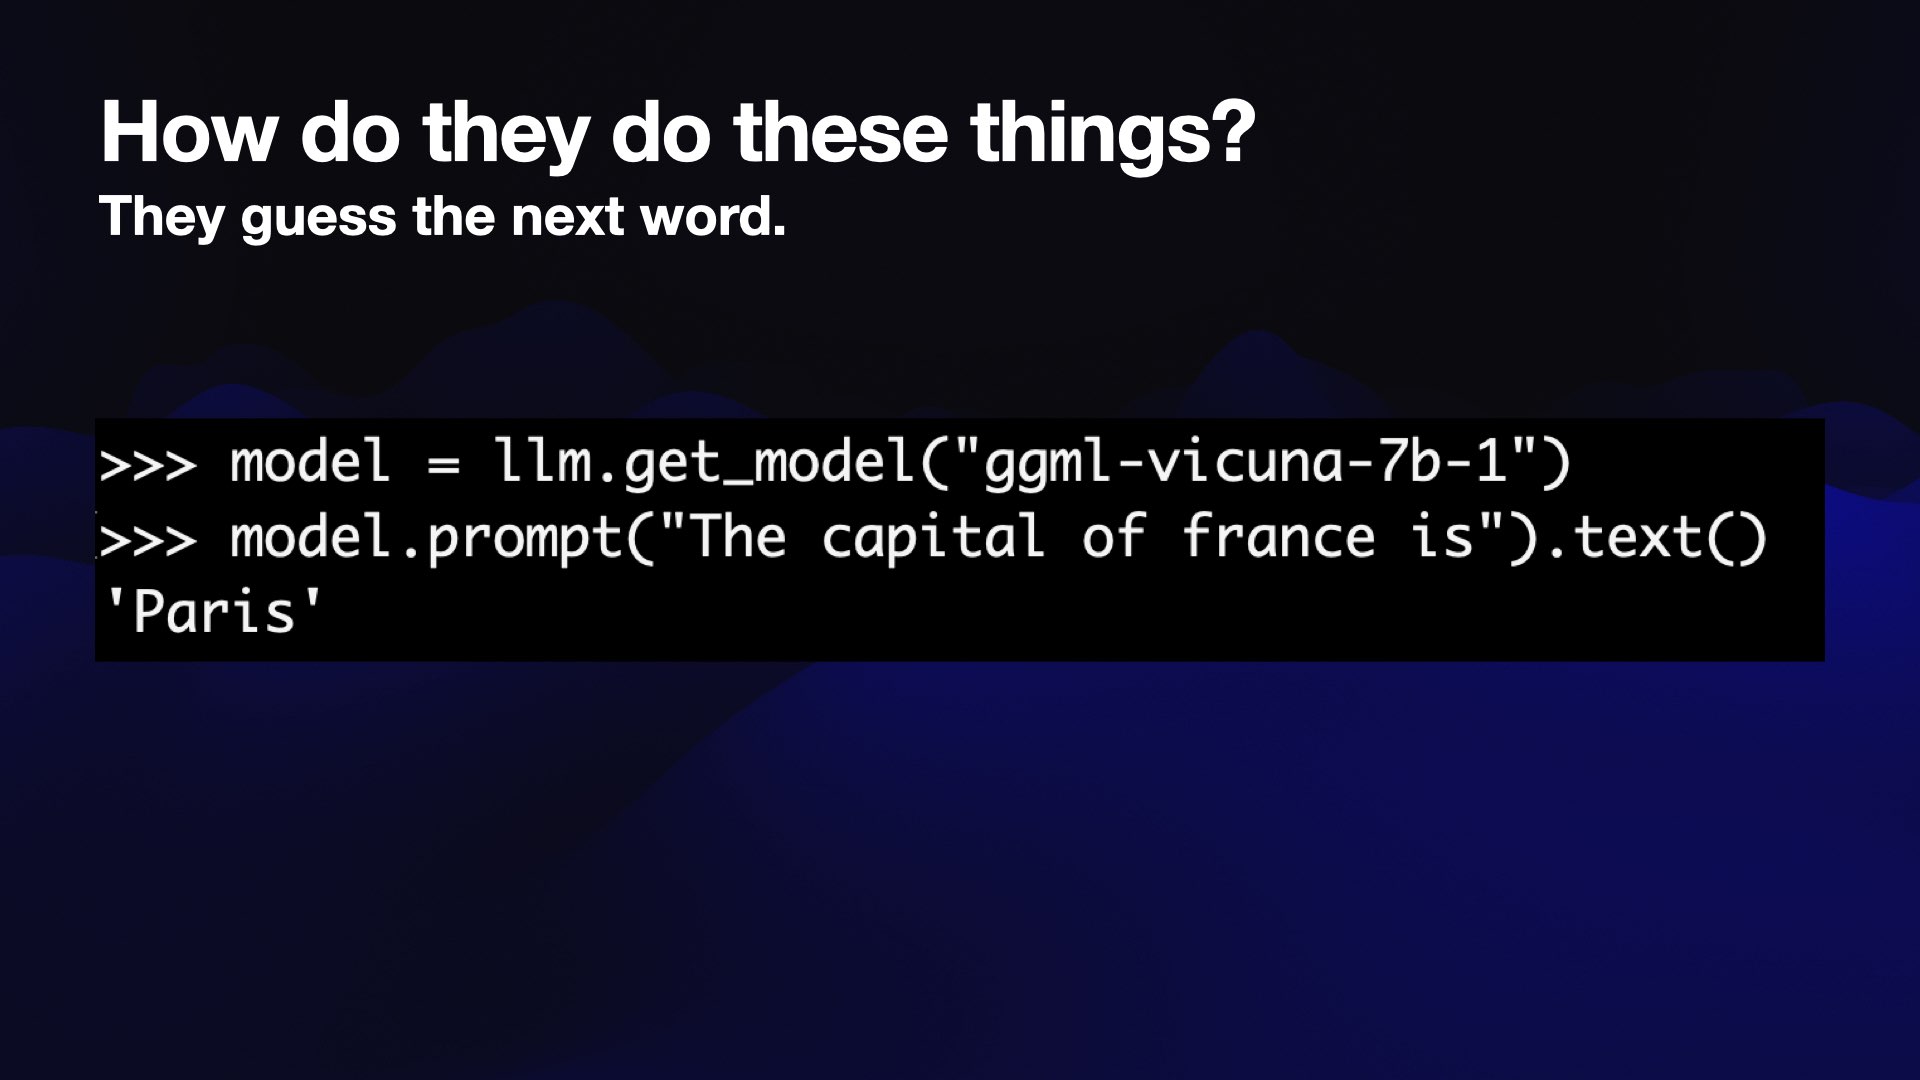 A Python prompt:  >>> model = llm.get_model("ggml-vicuna-7b-1") >>> model.prompt("The capital of france is").text() 'Paris' 